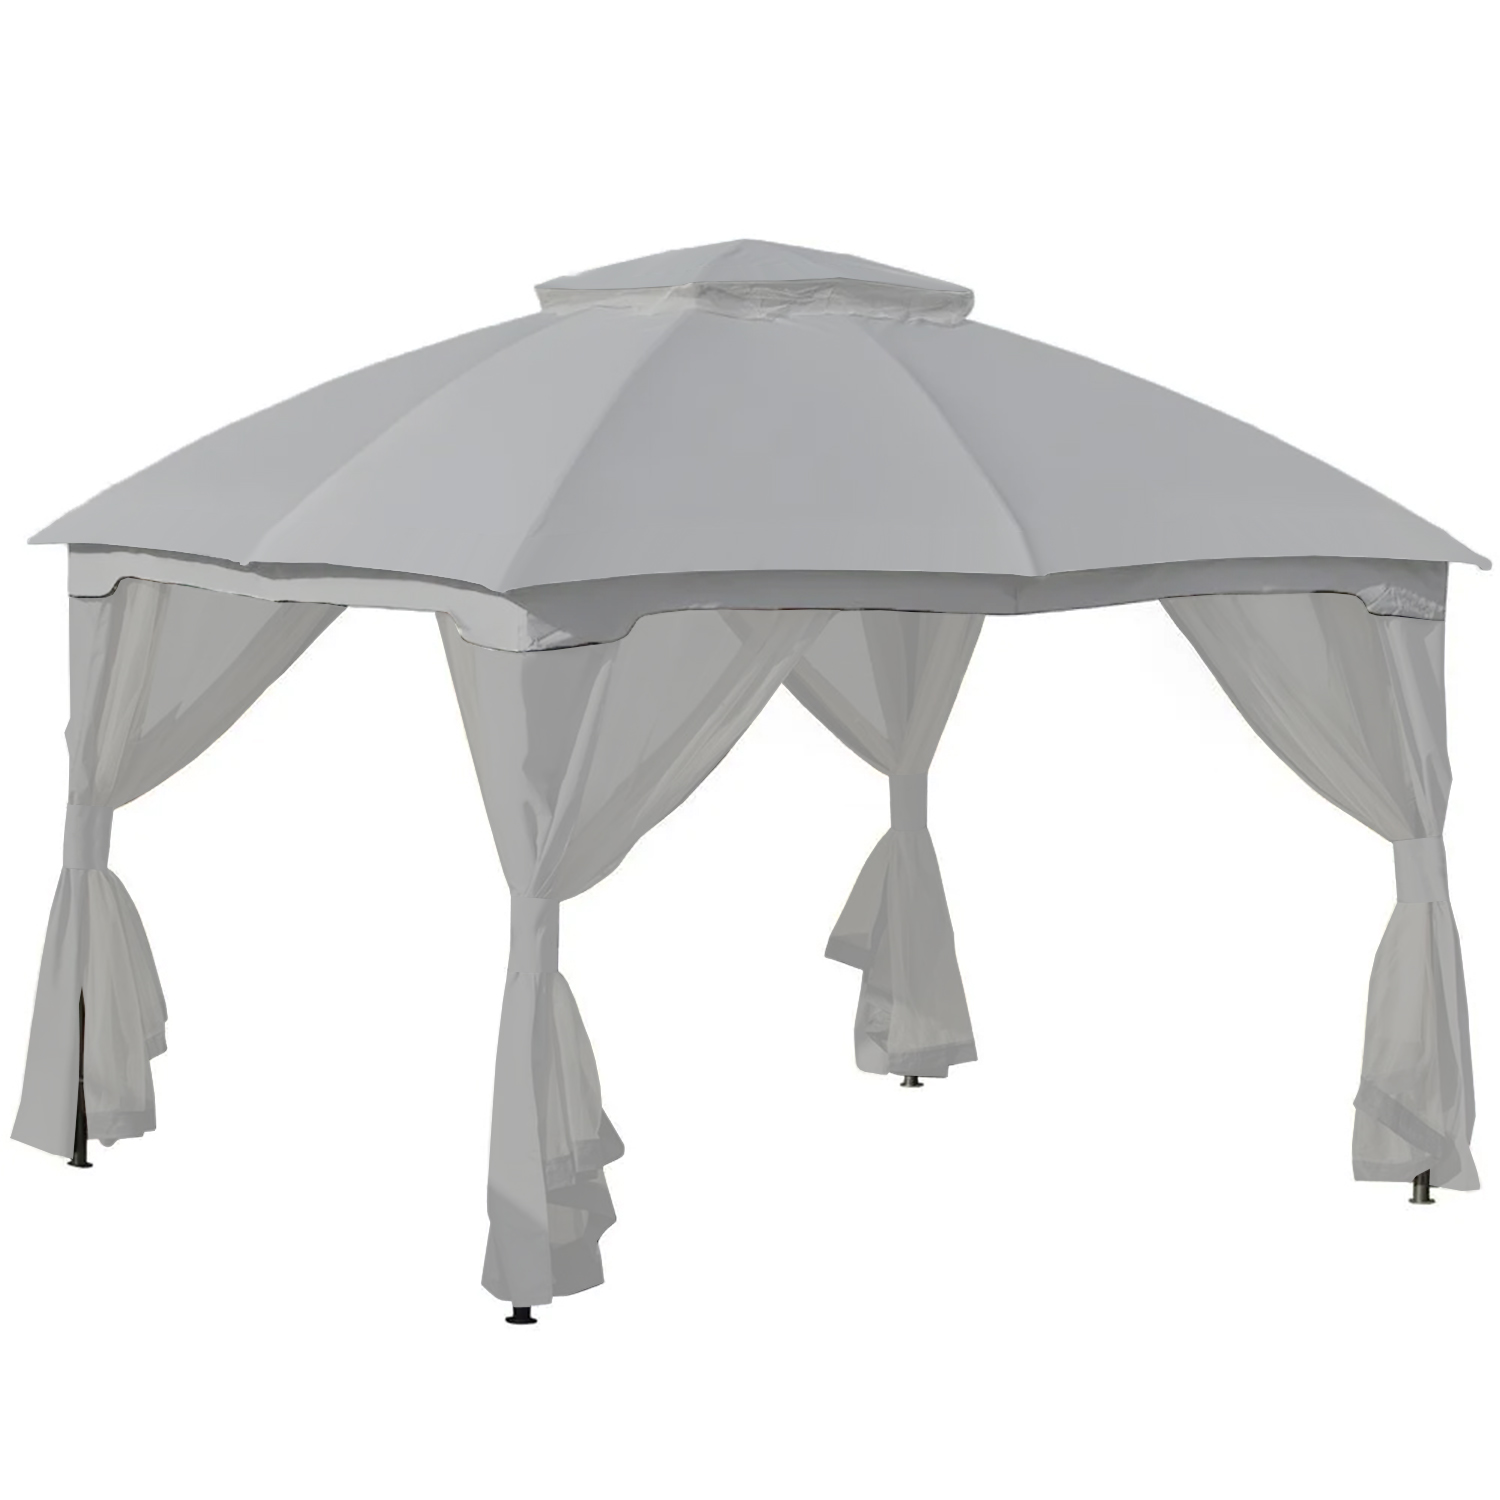 Replacement Canopy for 84C-210GY and 84C-210 Gazebo - Riplock 35